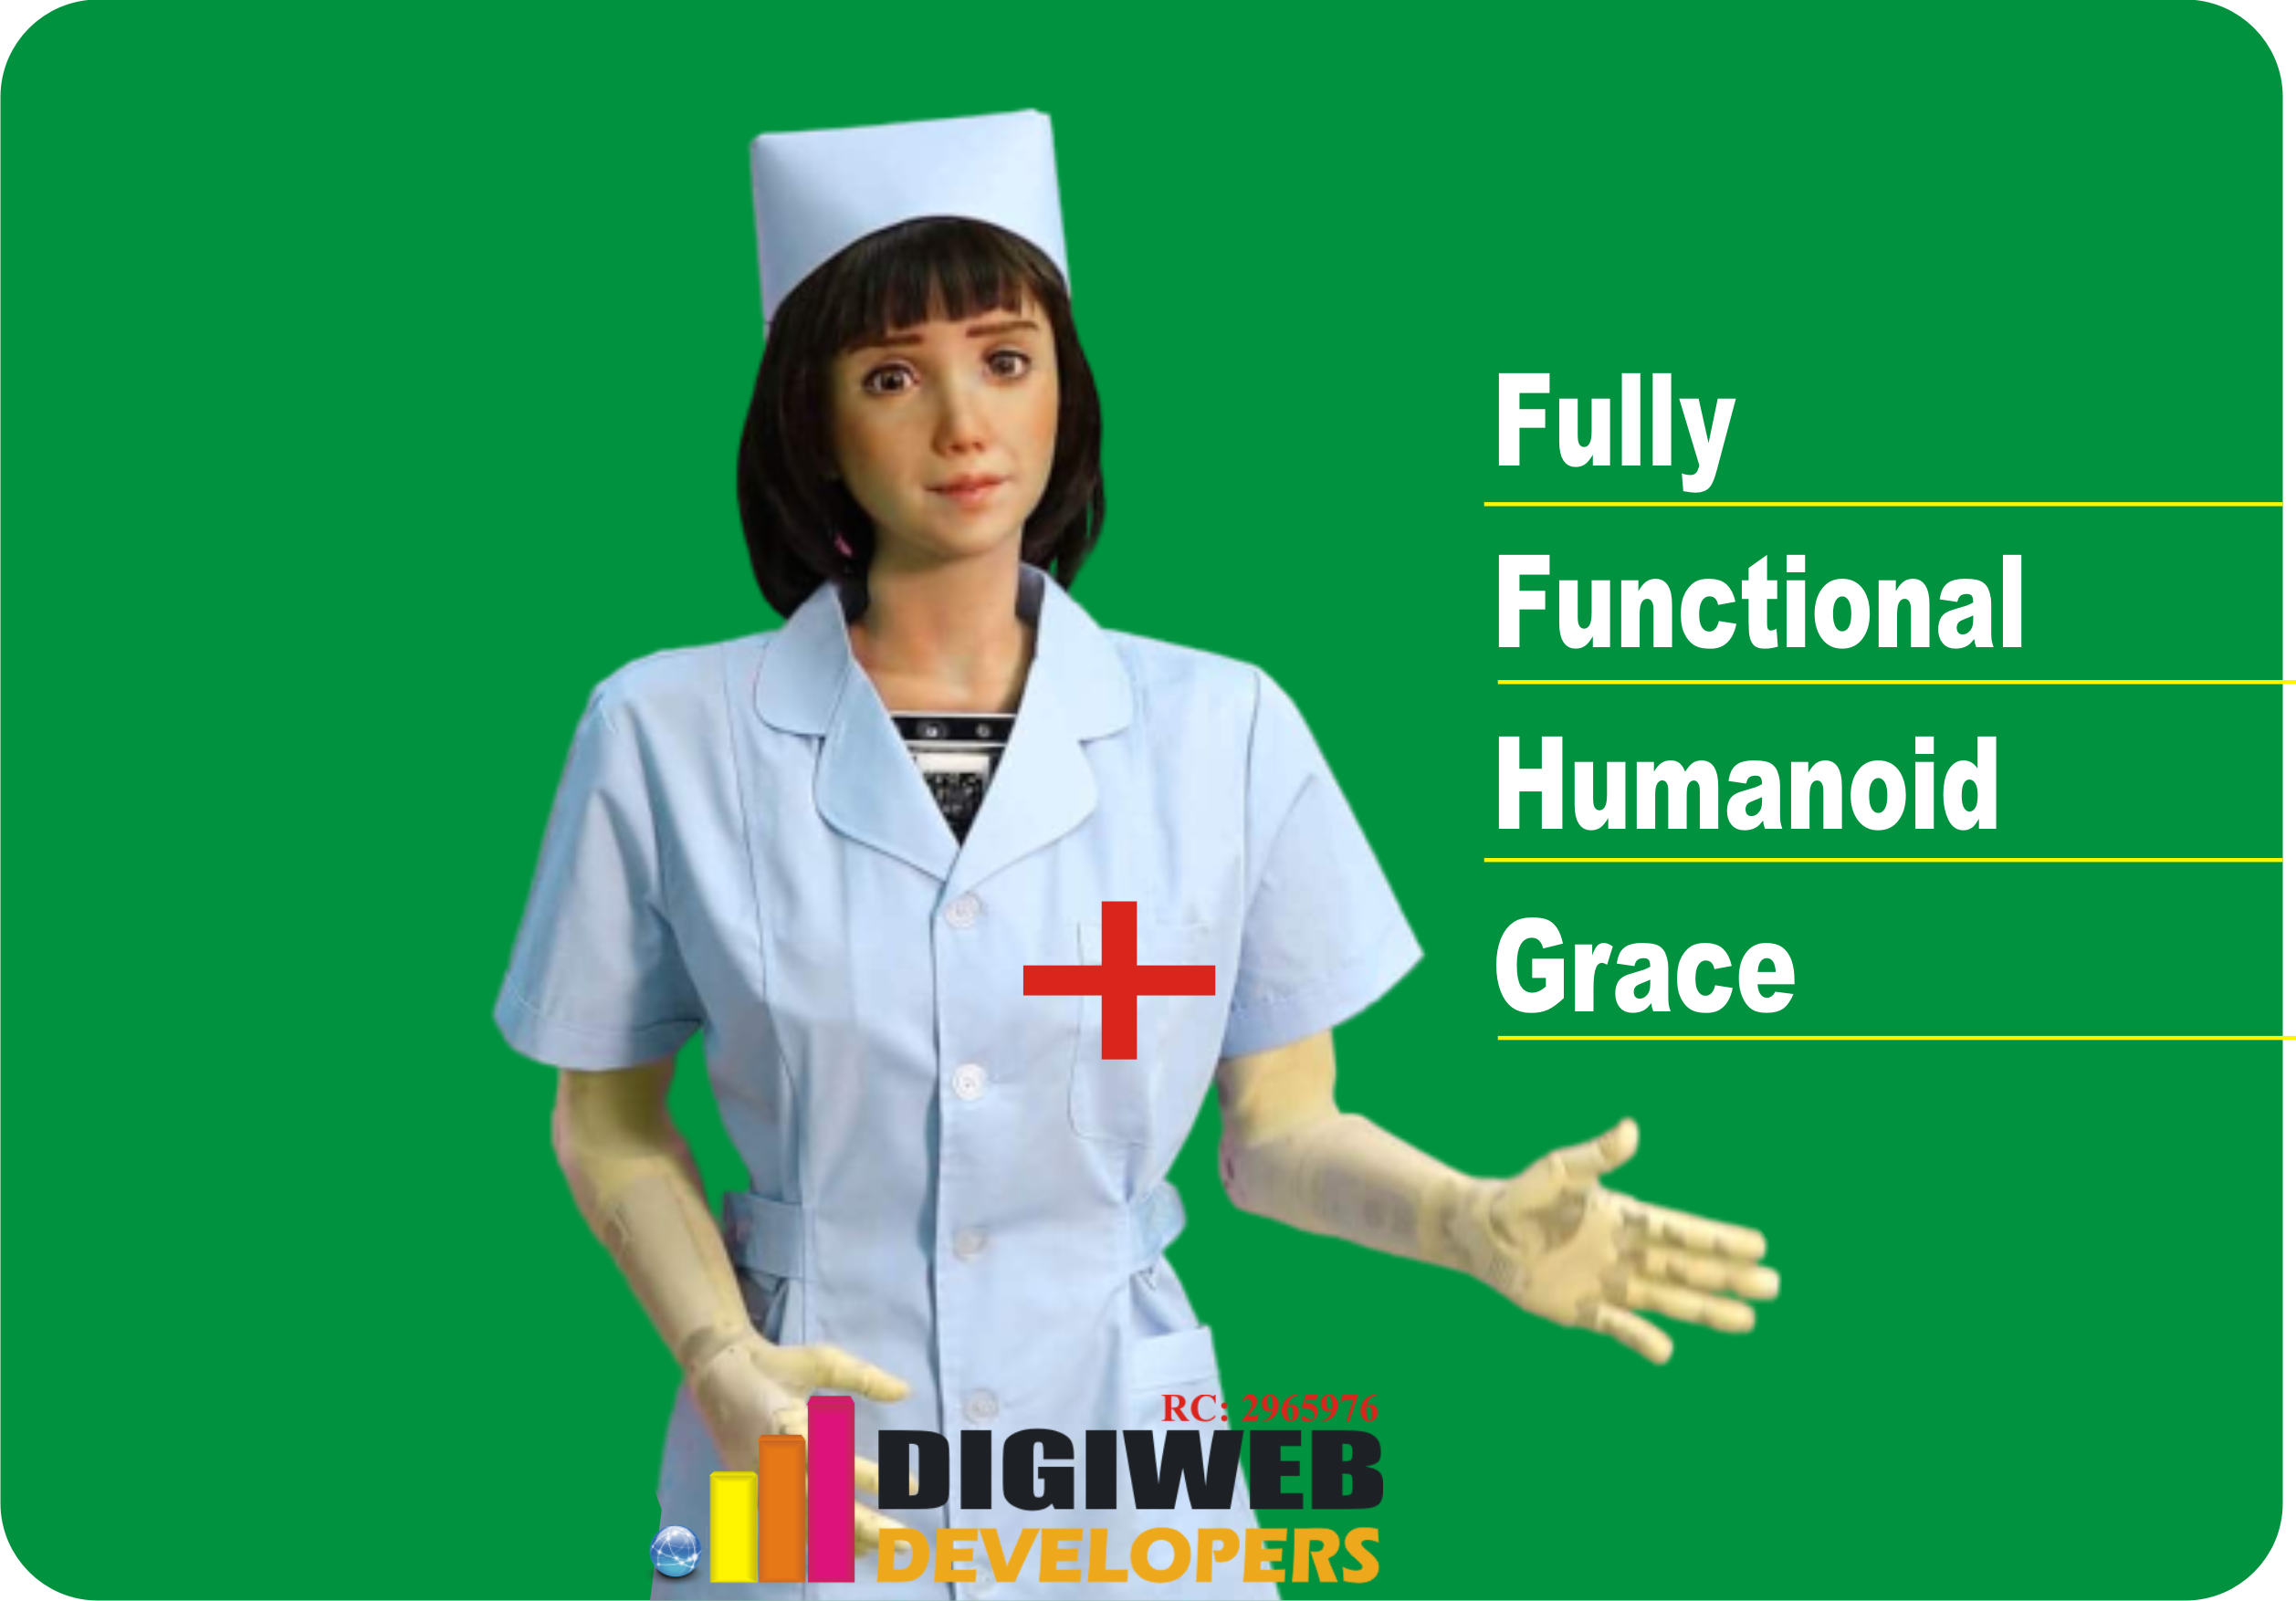 Hong Kong Releases a fully Functional Humanoid Grace